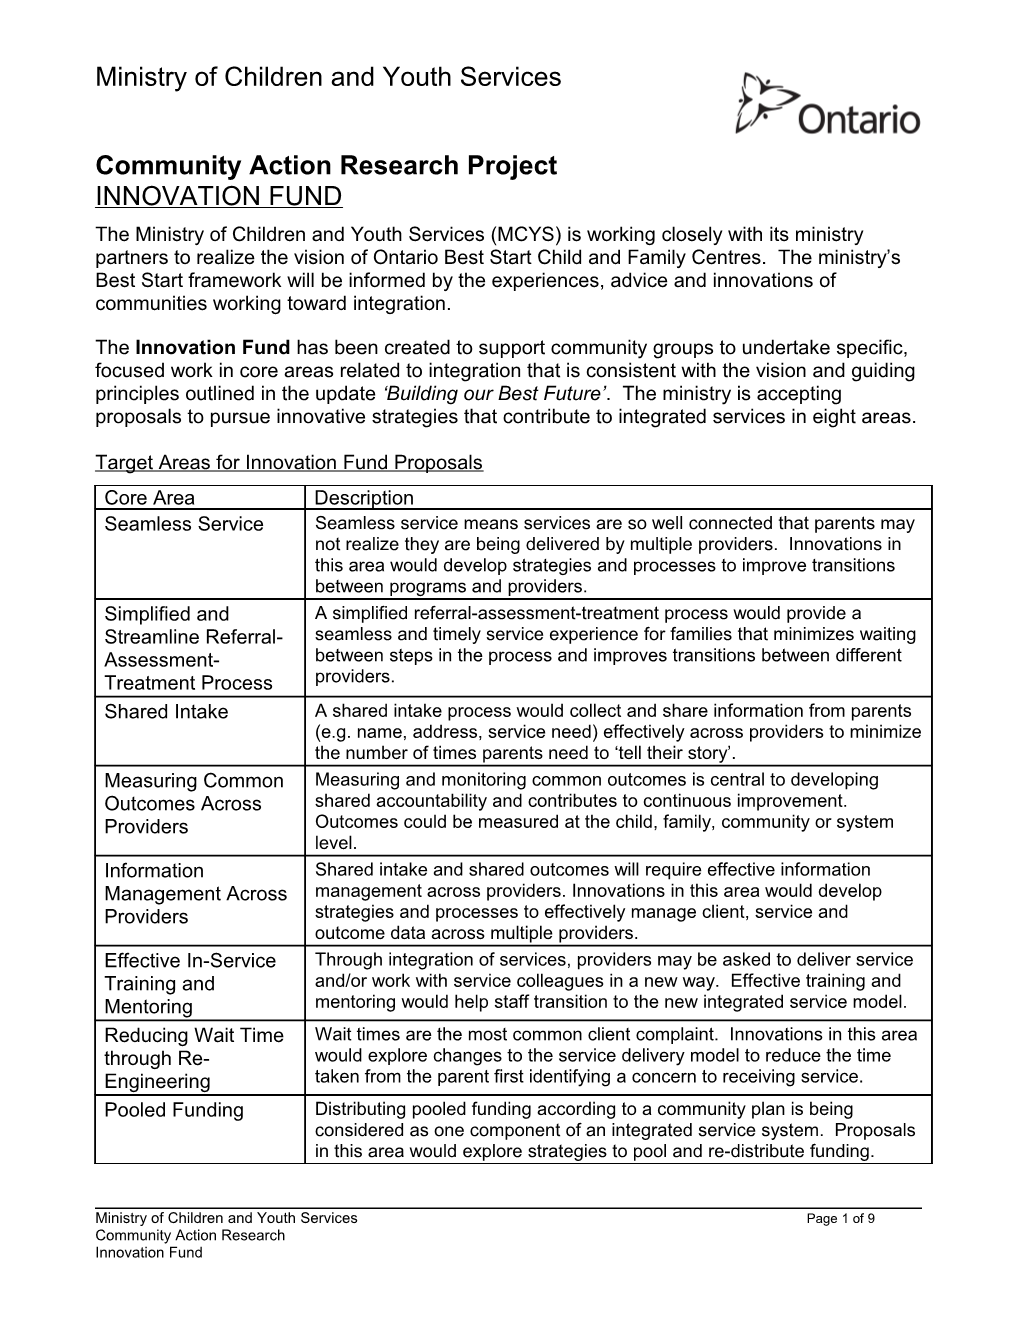 Community Action Research Project